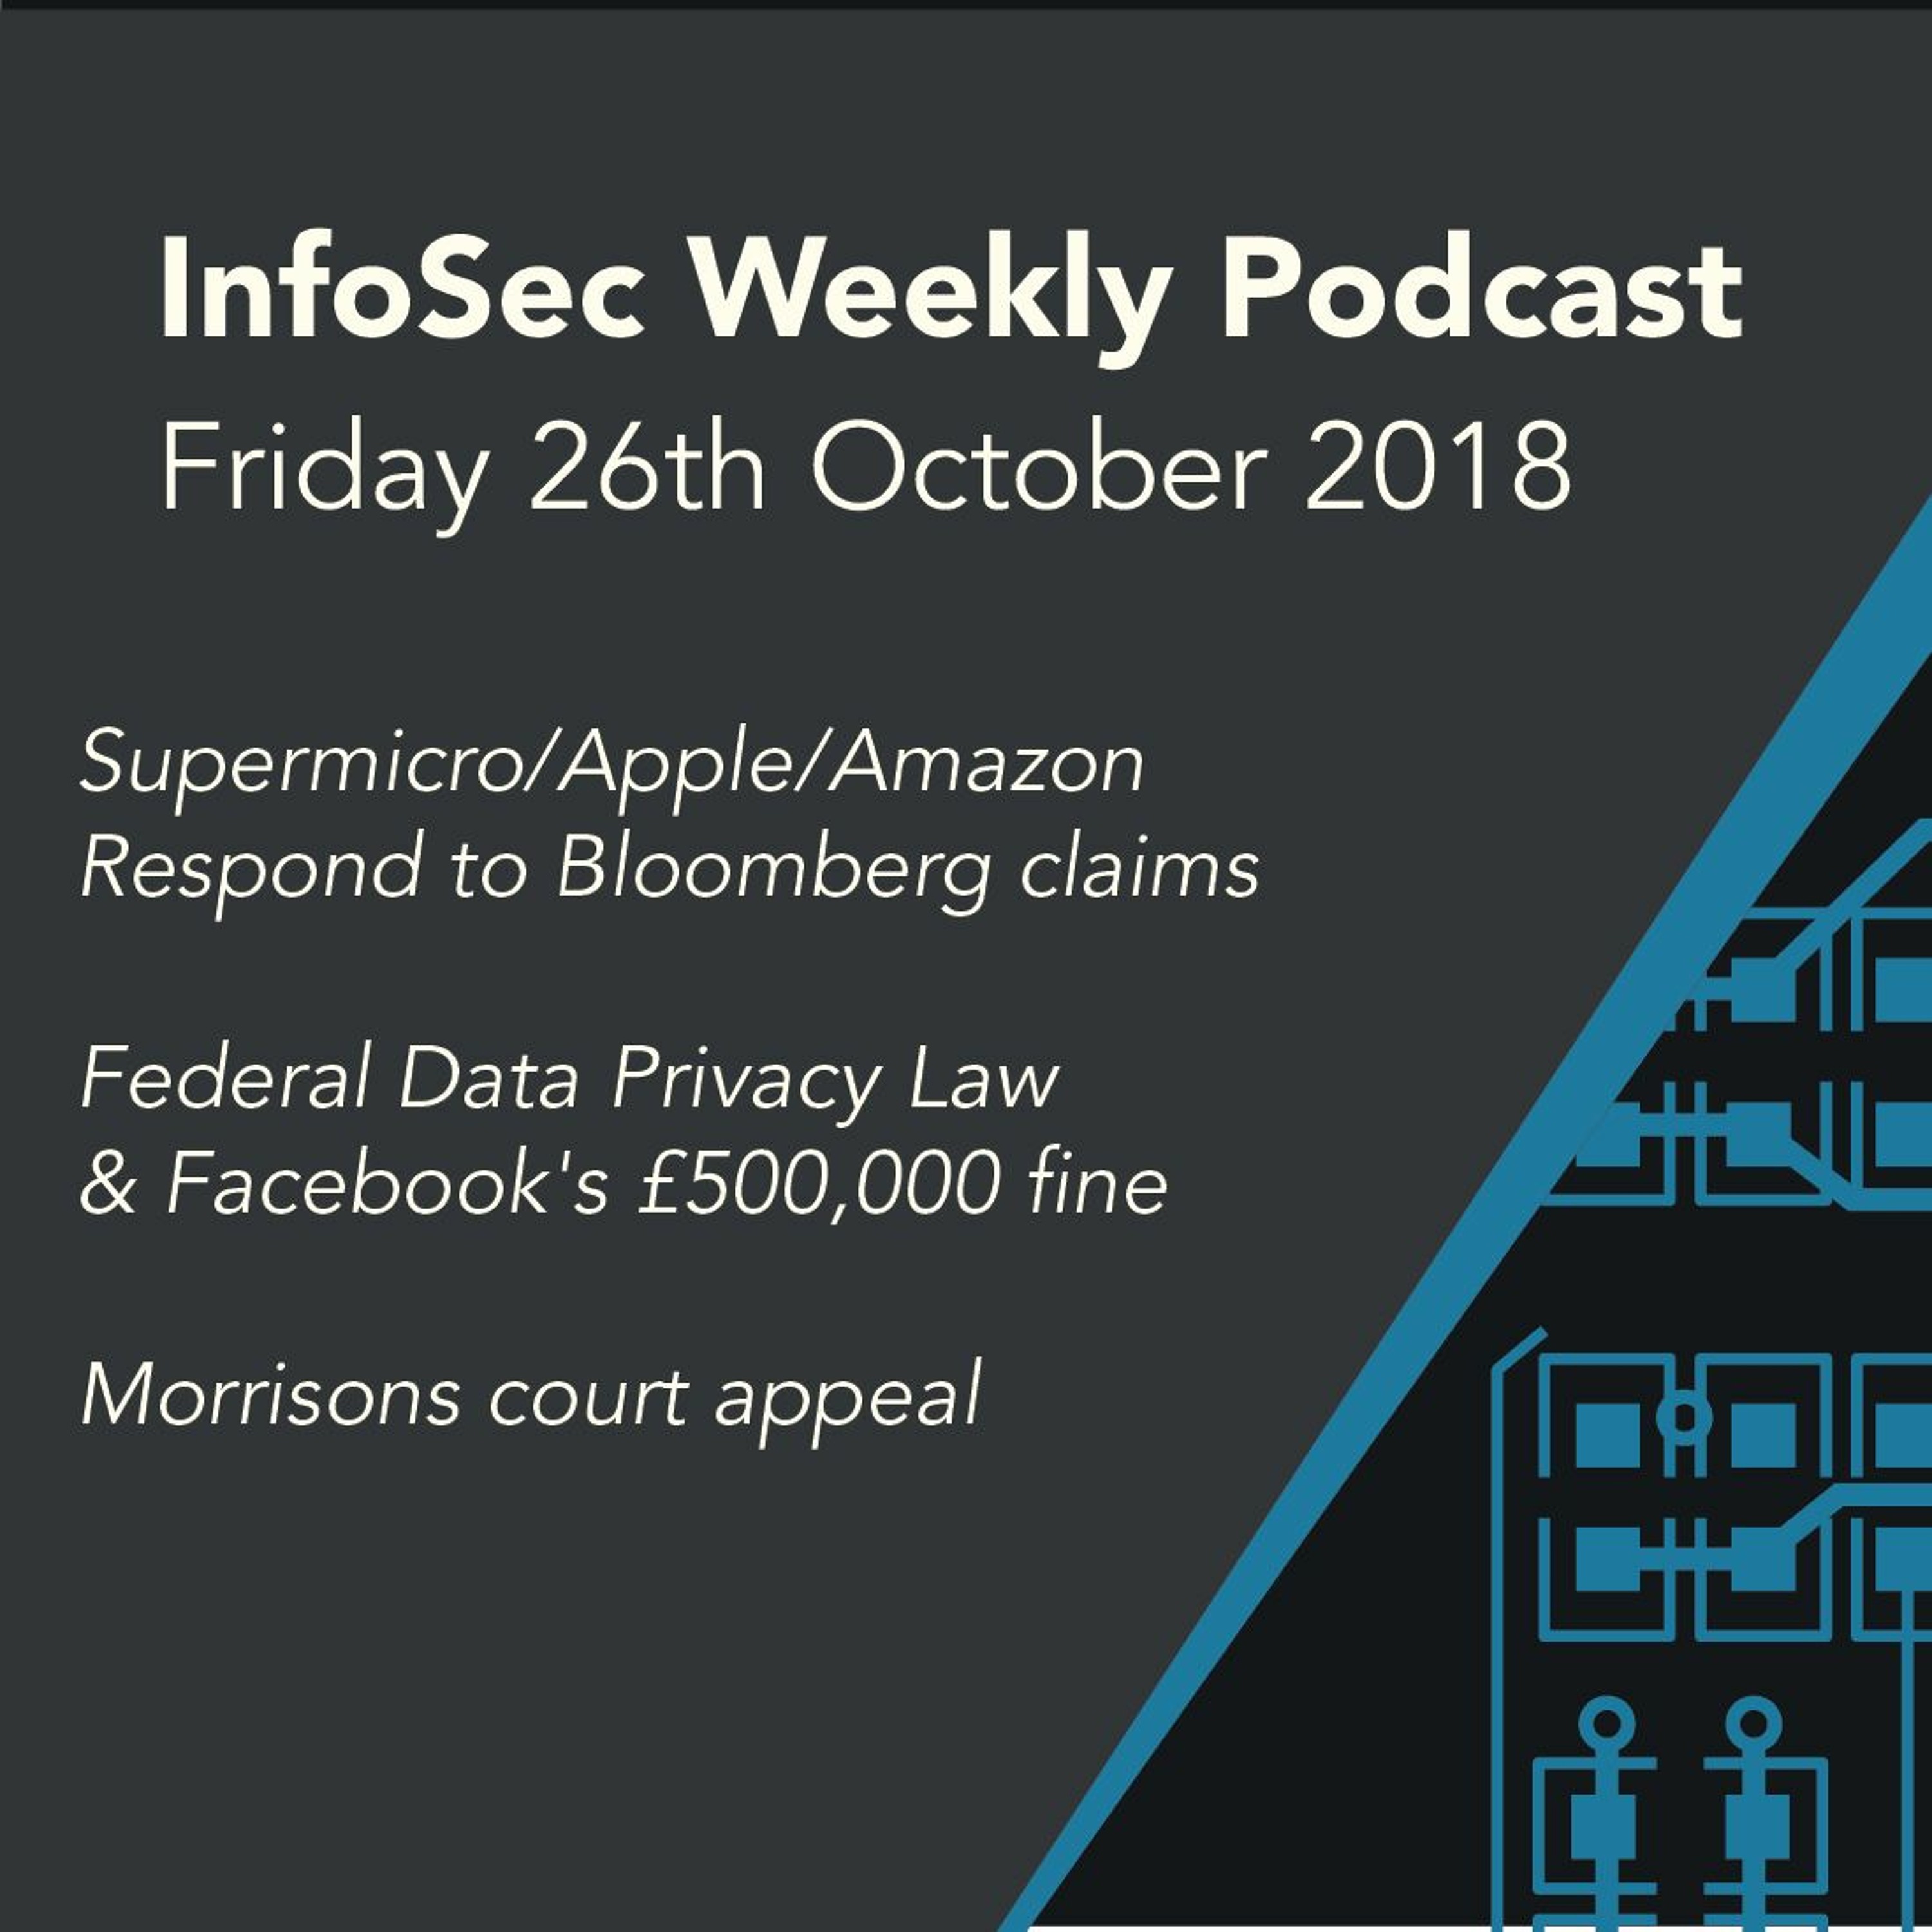 26 October Weekly podcast: Supermicro, federal data privacy law and Morrisons